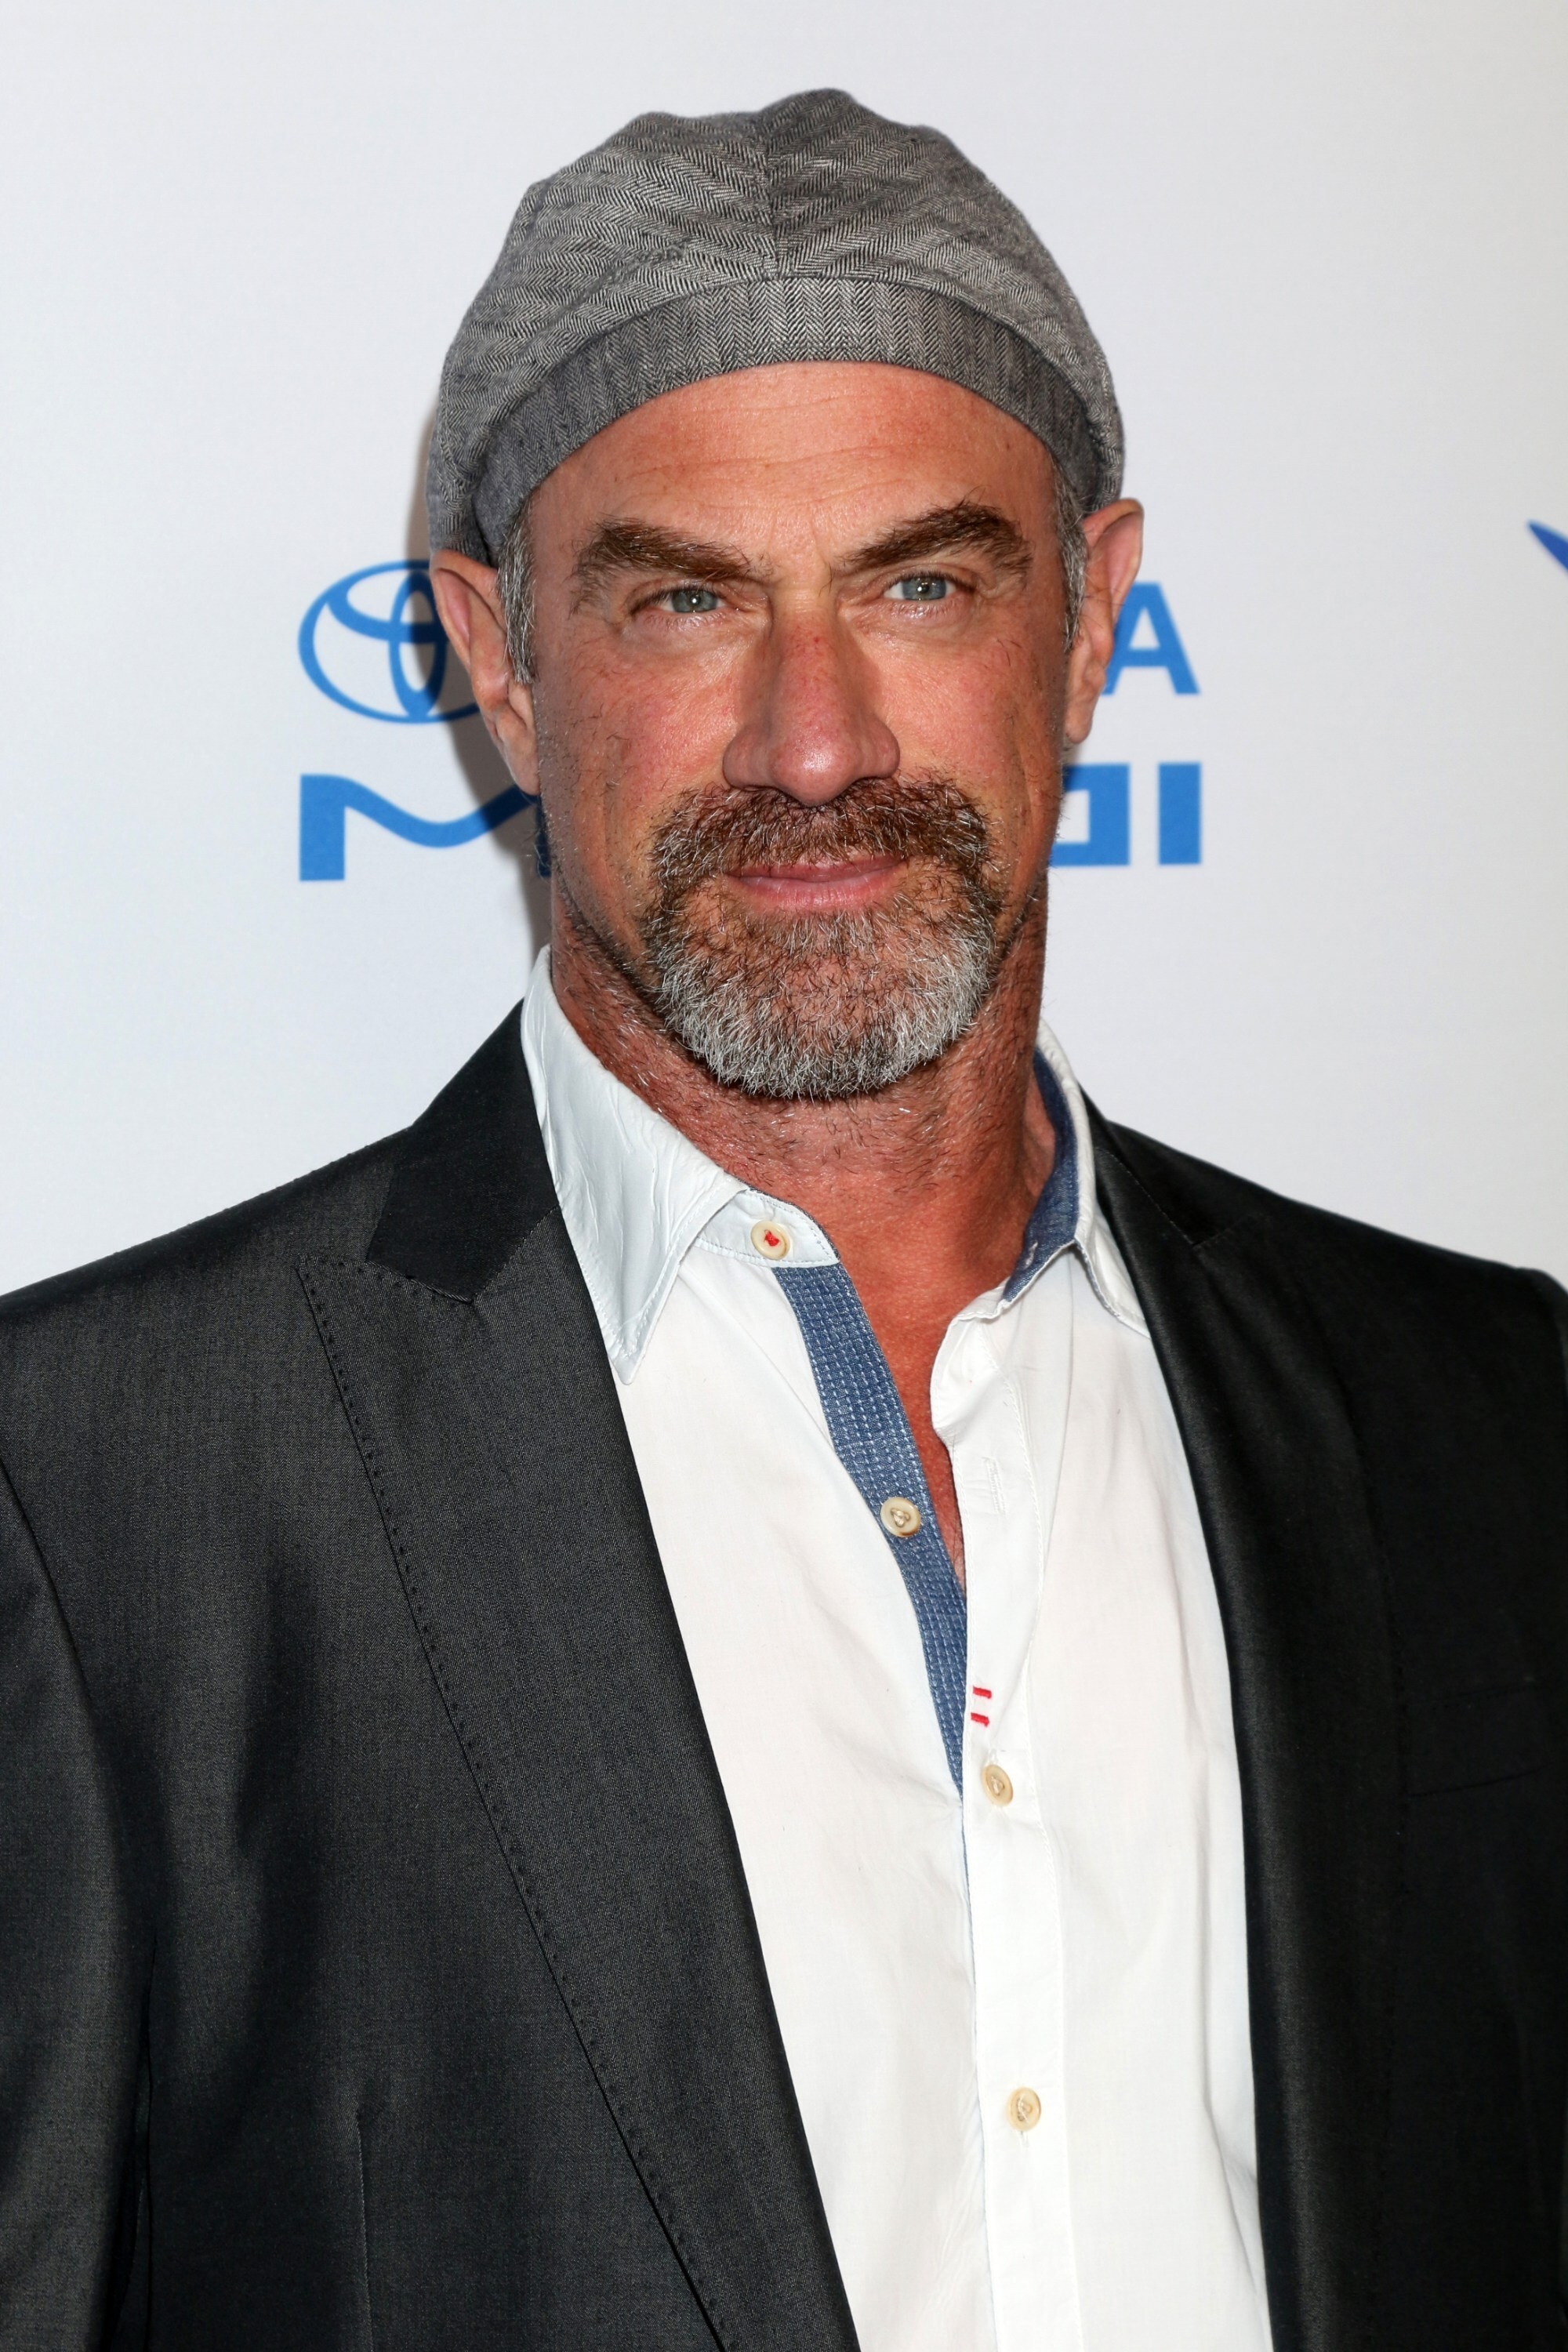 Chest-up portrait of Meloni at a step-and-repeat wearing a button-down and suit jacket with a jaunty beret-style cap, with a subtle half smile